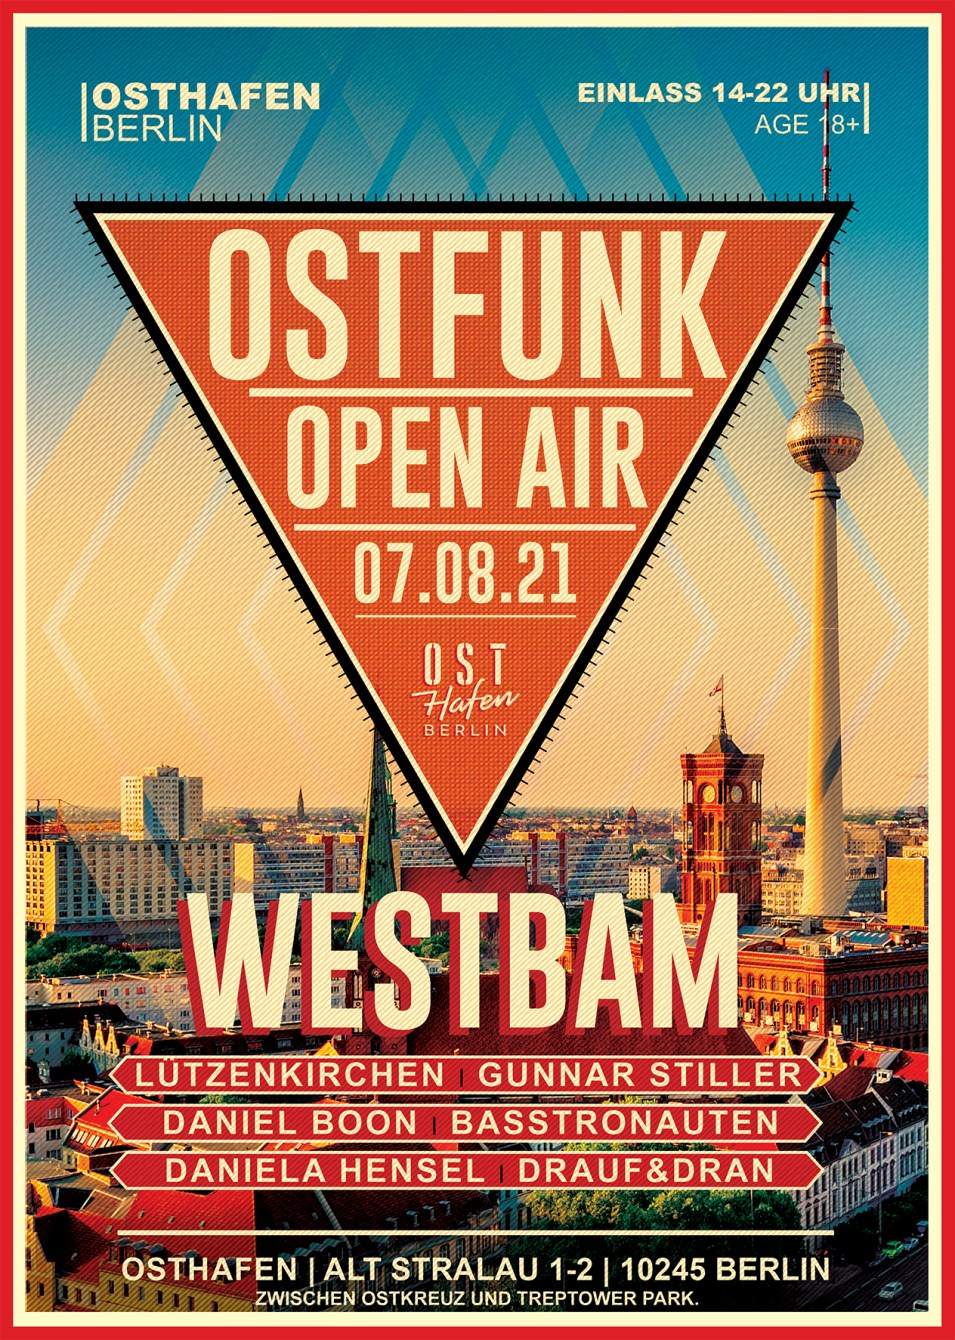 Ostfunk Open Air w./ Westbam and Friends - フライヤー表